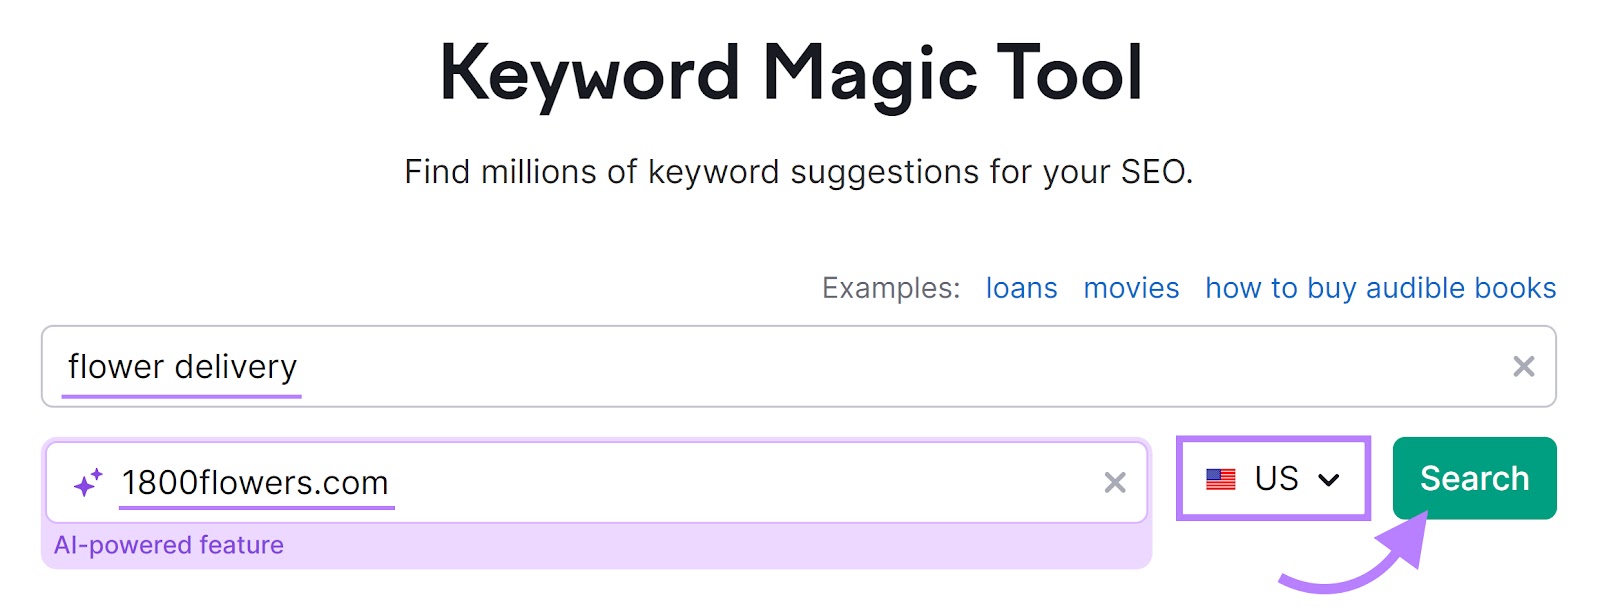 Keyword Magic Tool with "flower delivery" in the search field and "1800flowers.com" in the AI-powered feature field.